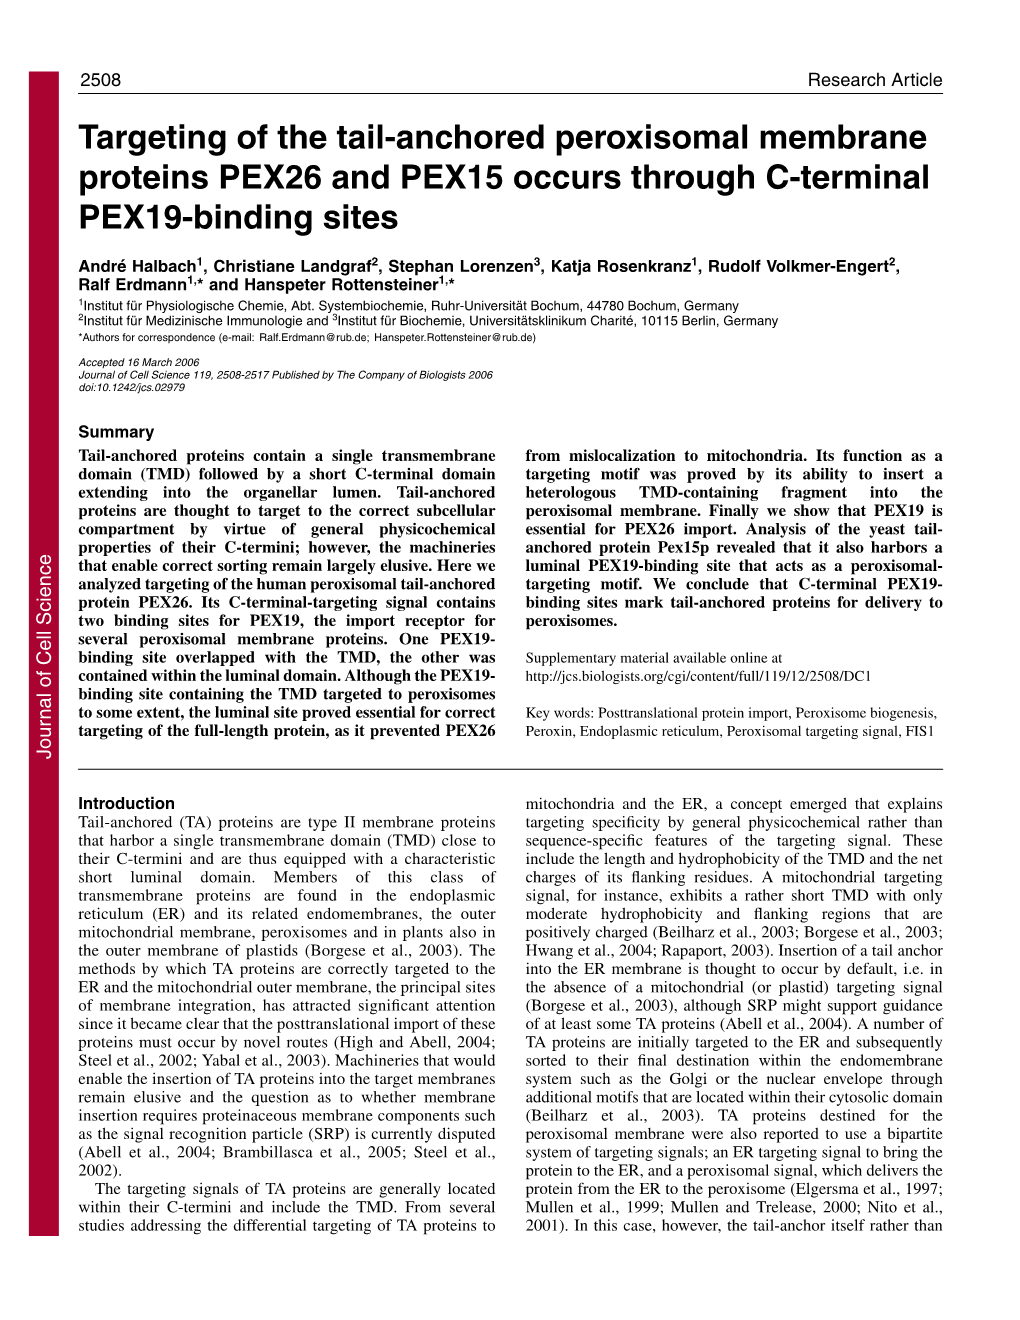 Targeting of the Tail-Anchored Peroxisomal Membrane Proteins PEX26 and PEX15 Occurs Through C-Terminal PEX19-Binding Sites